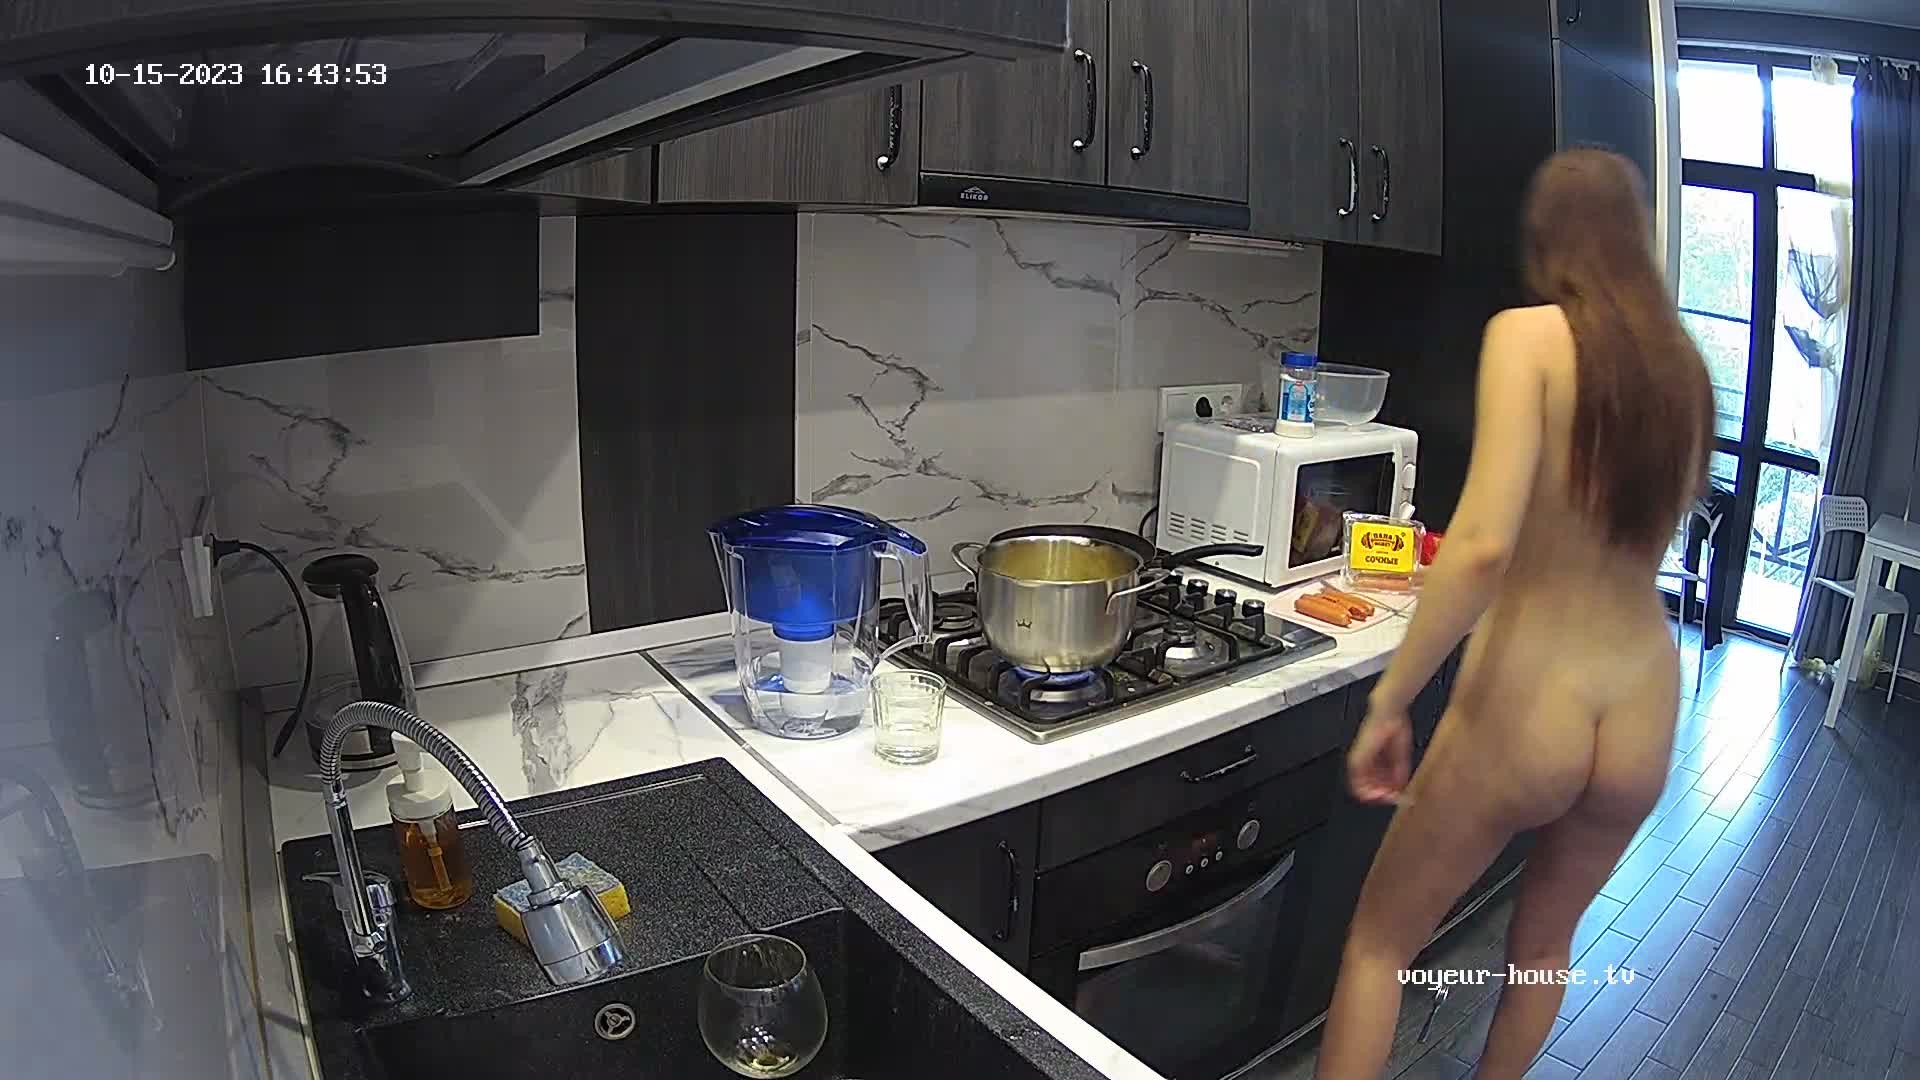 Harmony naked cooking, Oct15/23